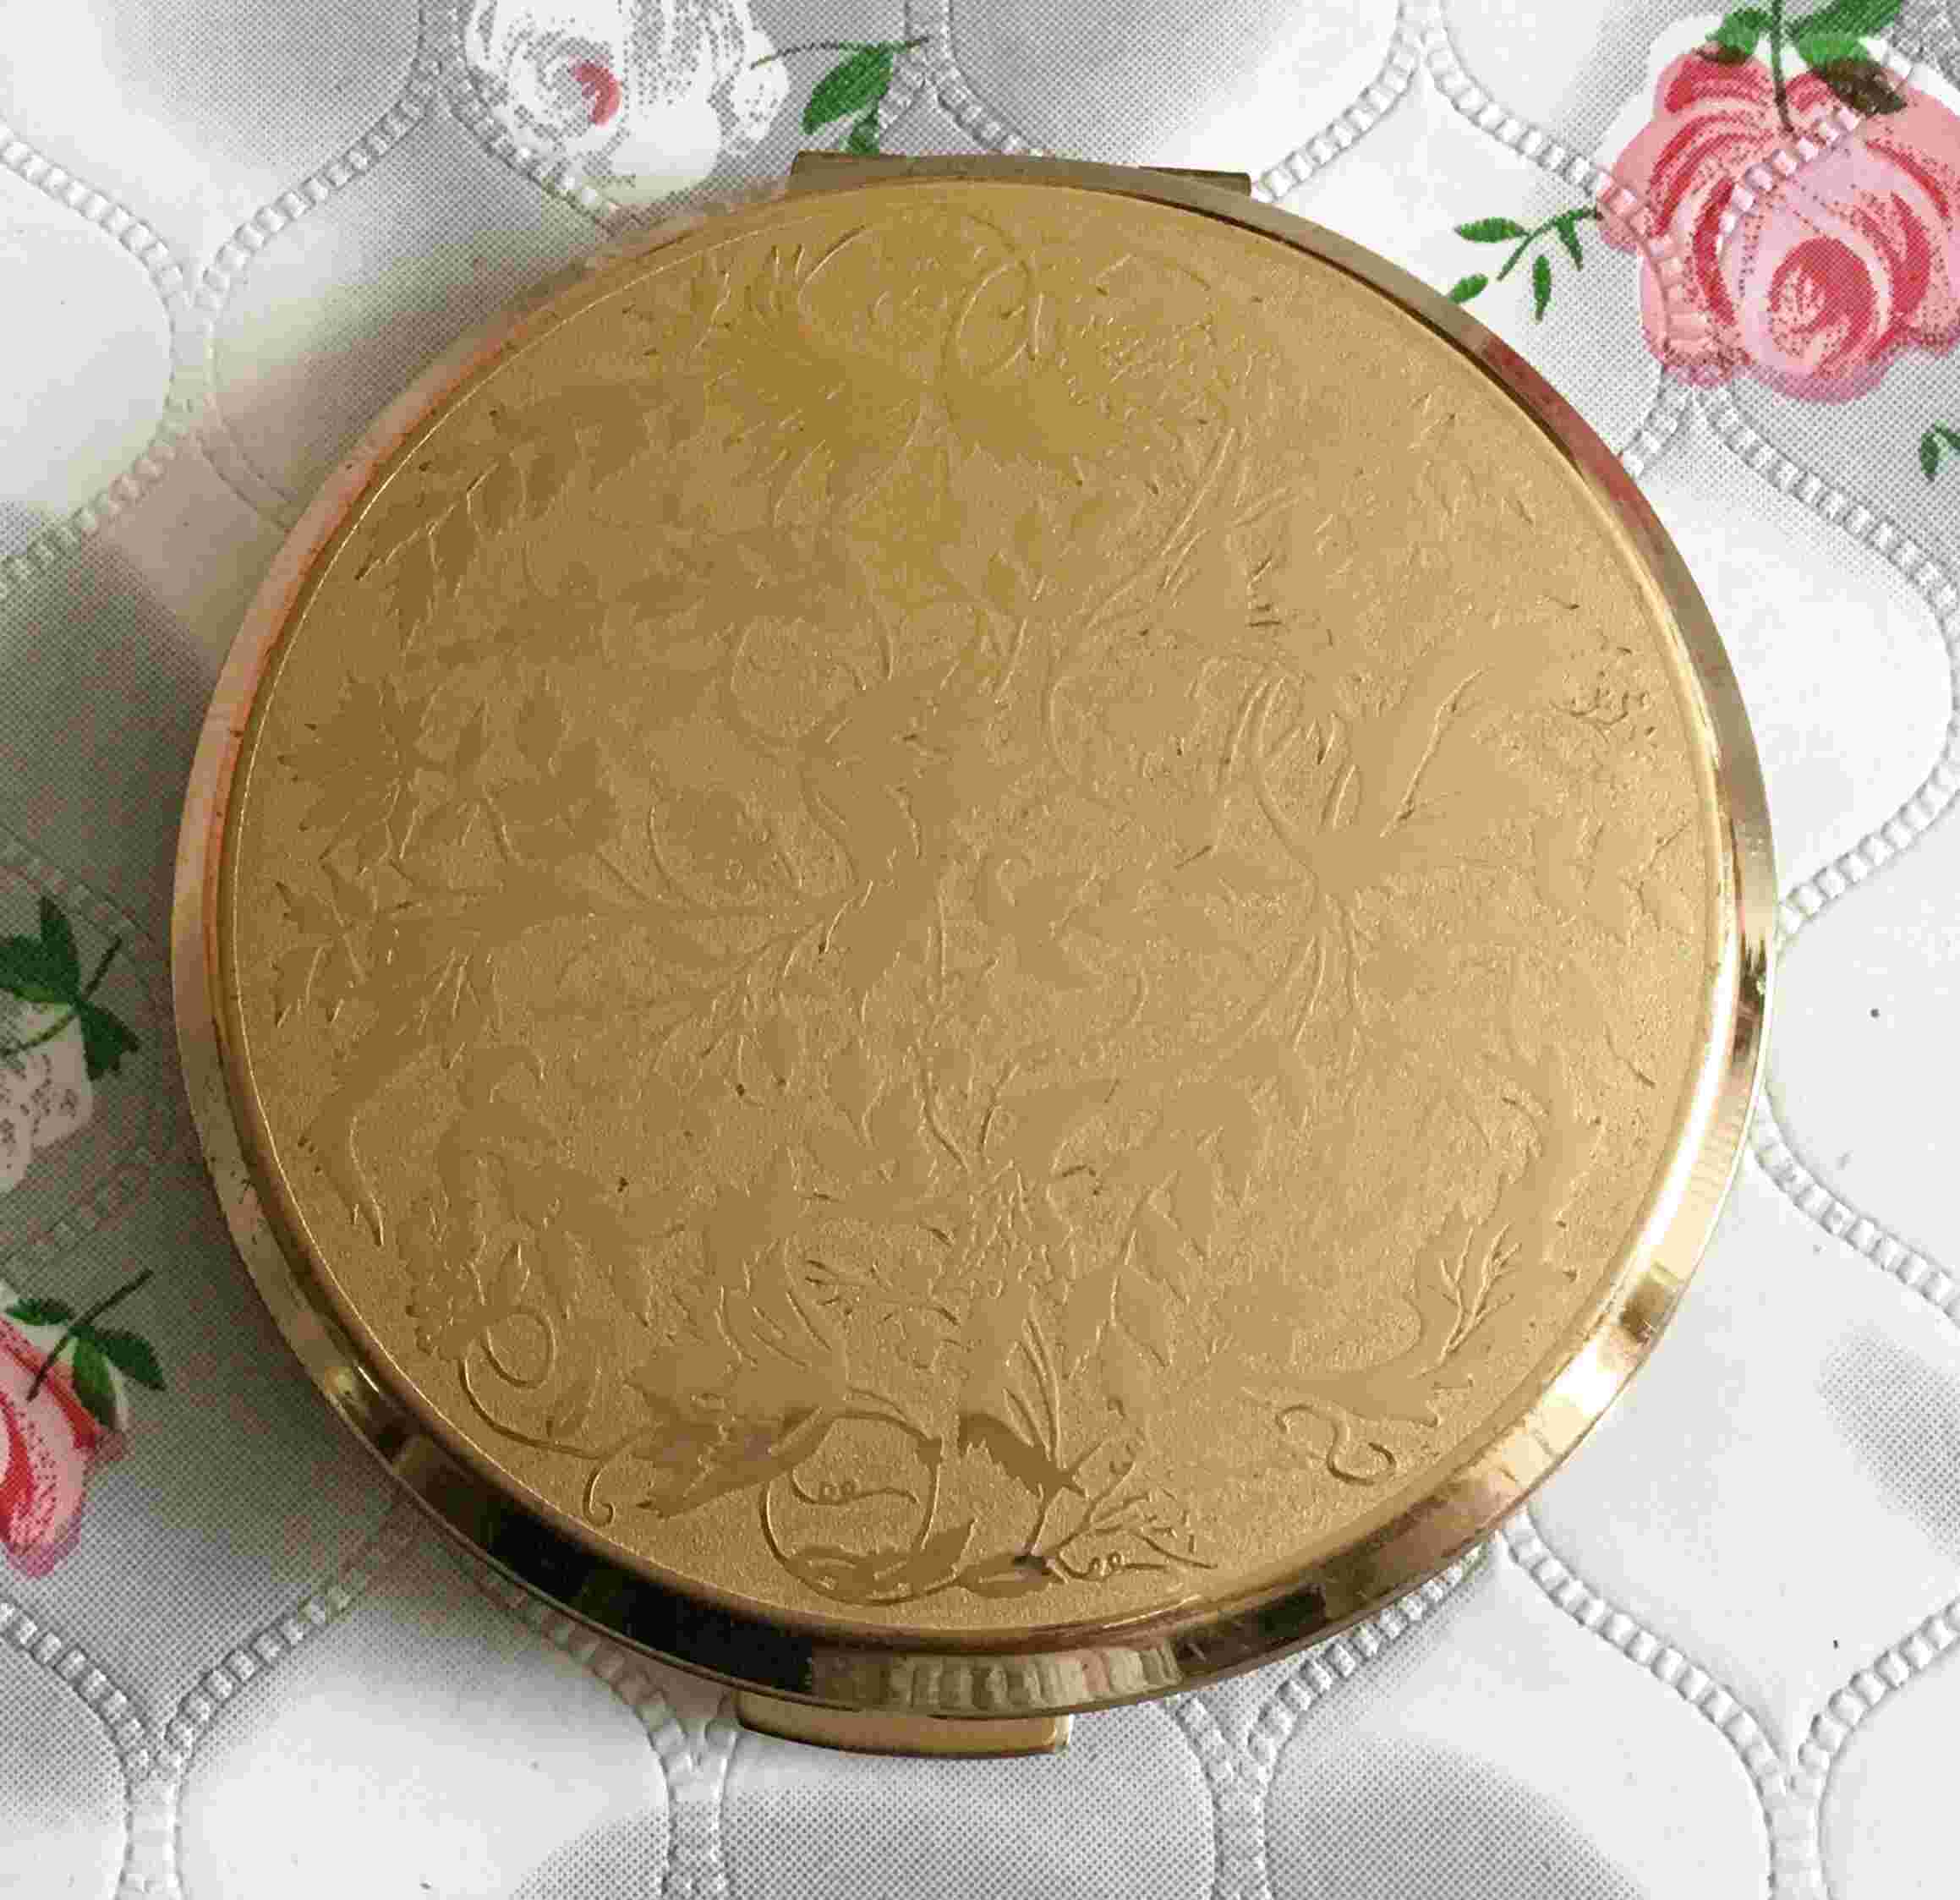 Vintage Stratton Compact Mirror For Sale In Uk